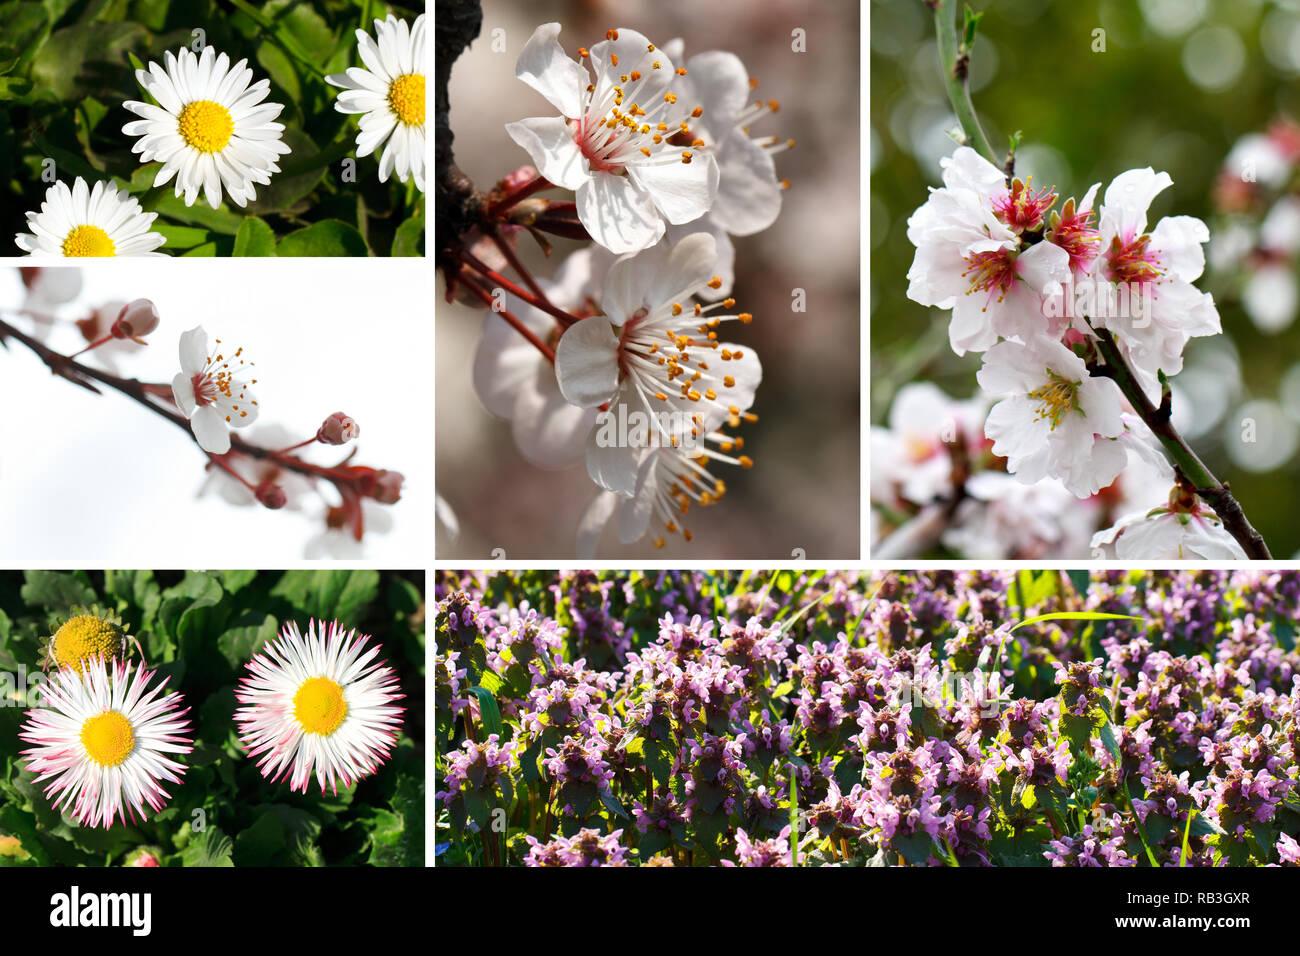 Collage of various spring flowers Stock Photo